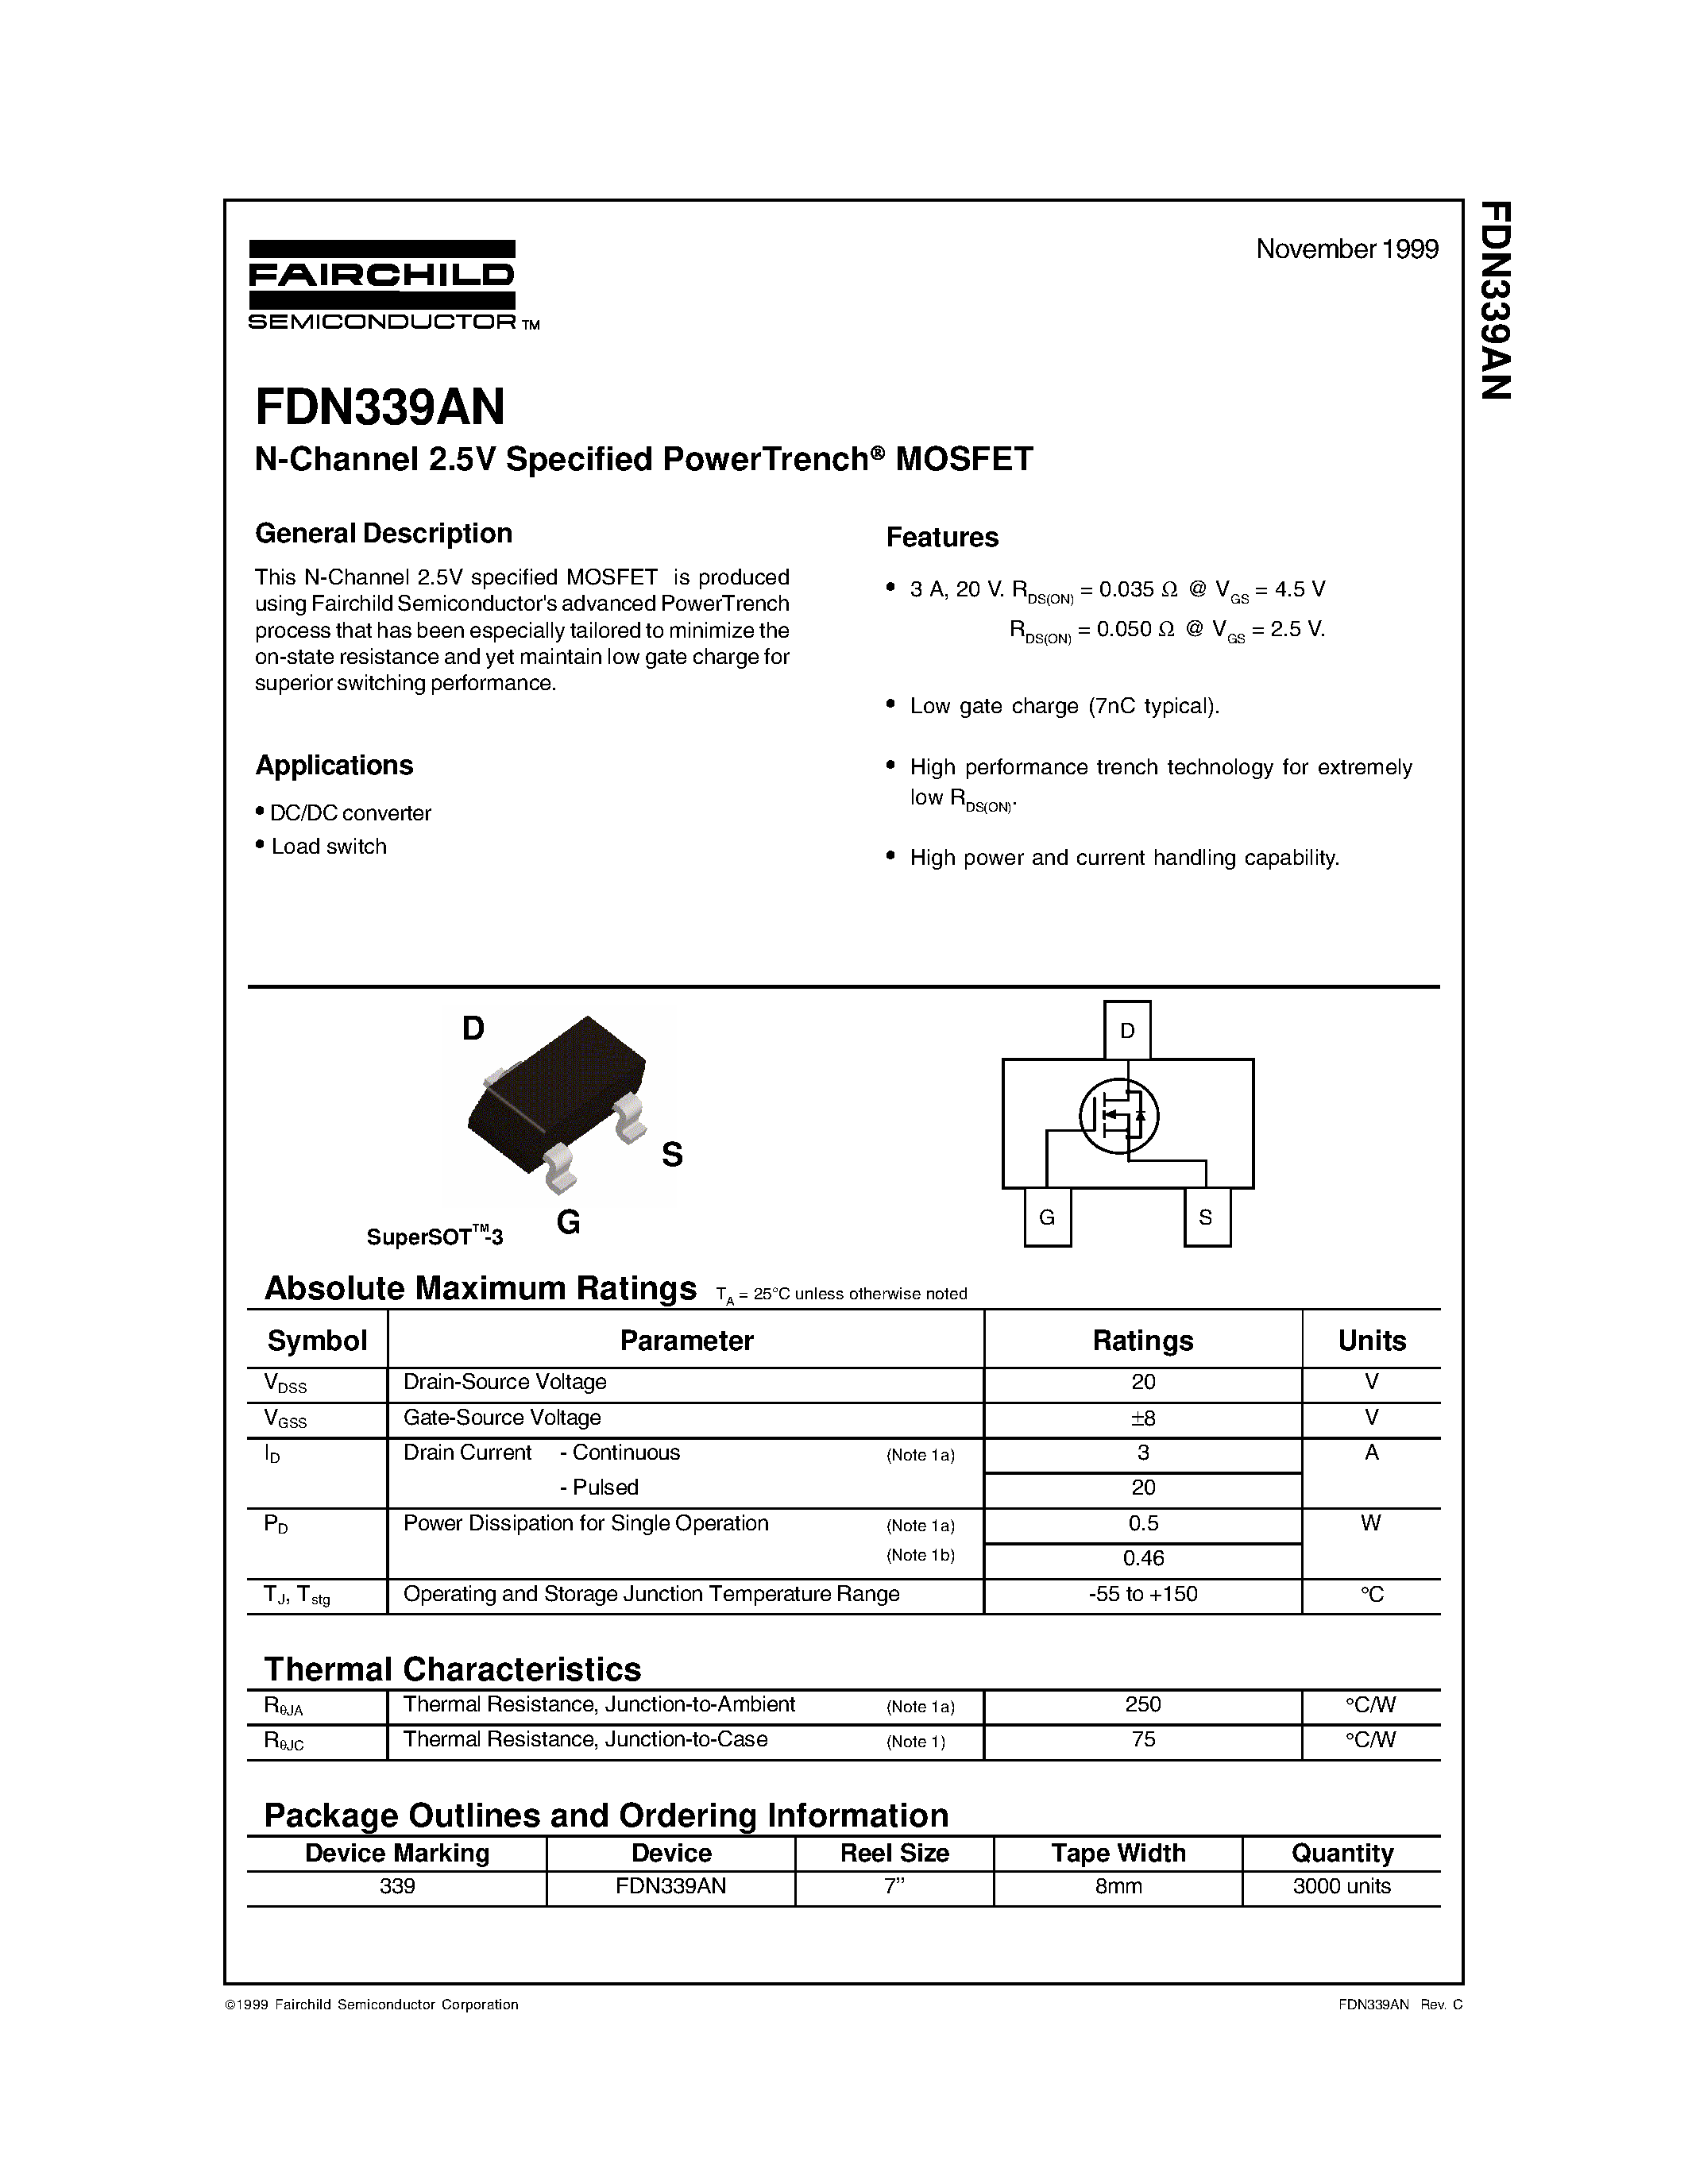 Datasheet FDN339AN - N-Channel 2.5V Specified PowerTrench MOSFET page 1